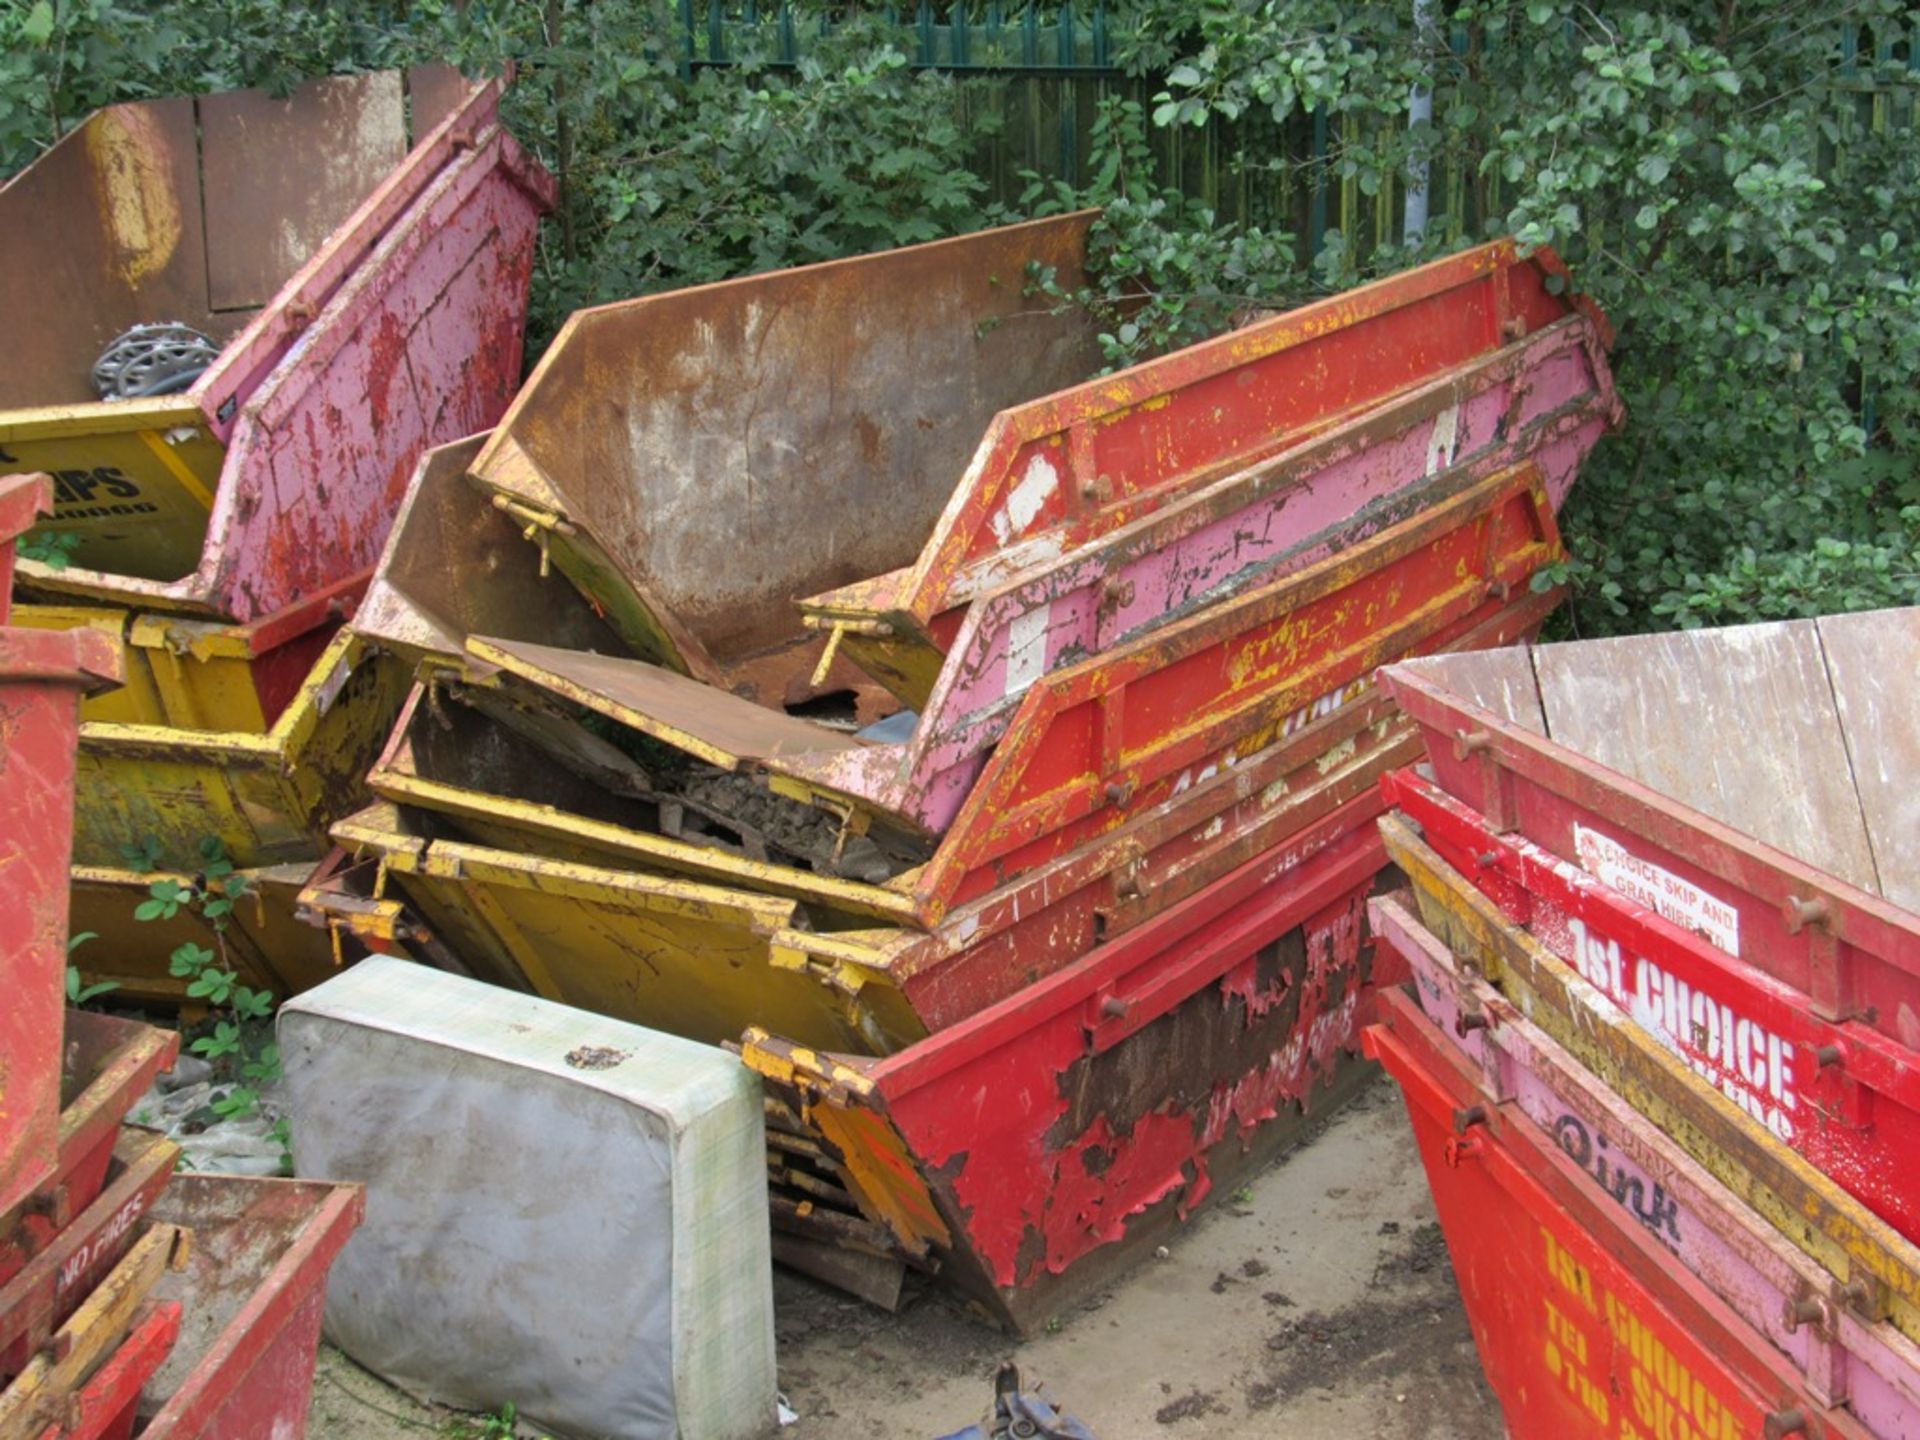 4 – Various skips (Not all skips in photo are 1st